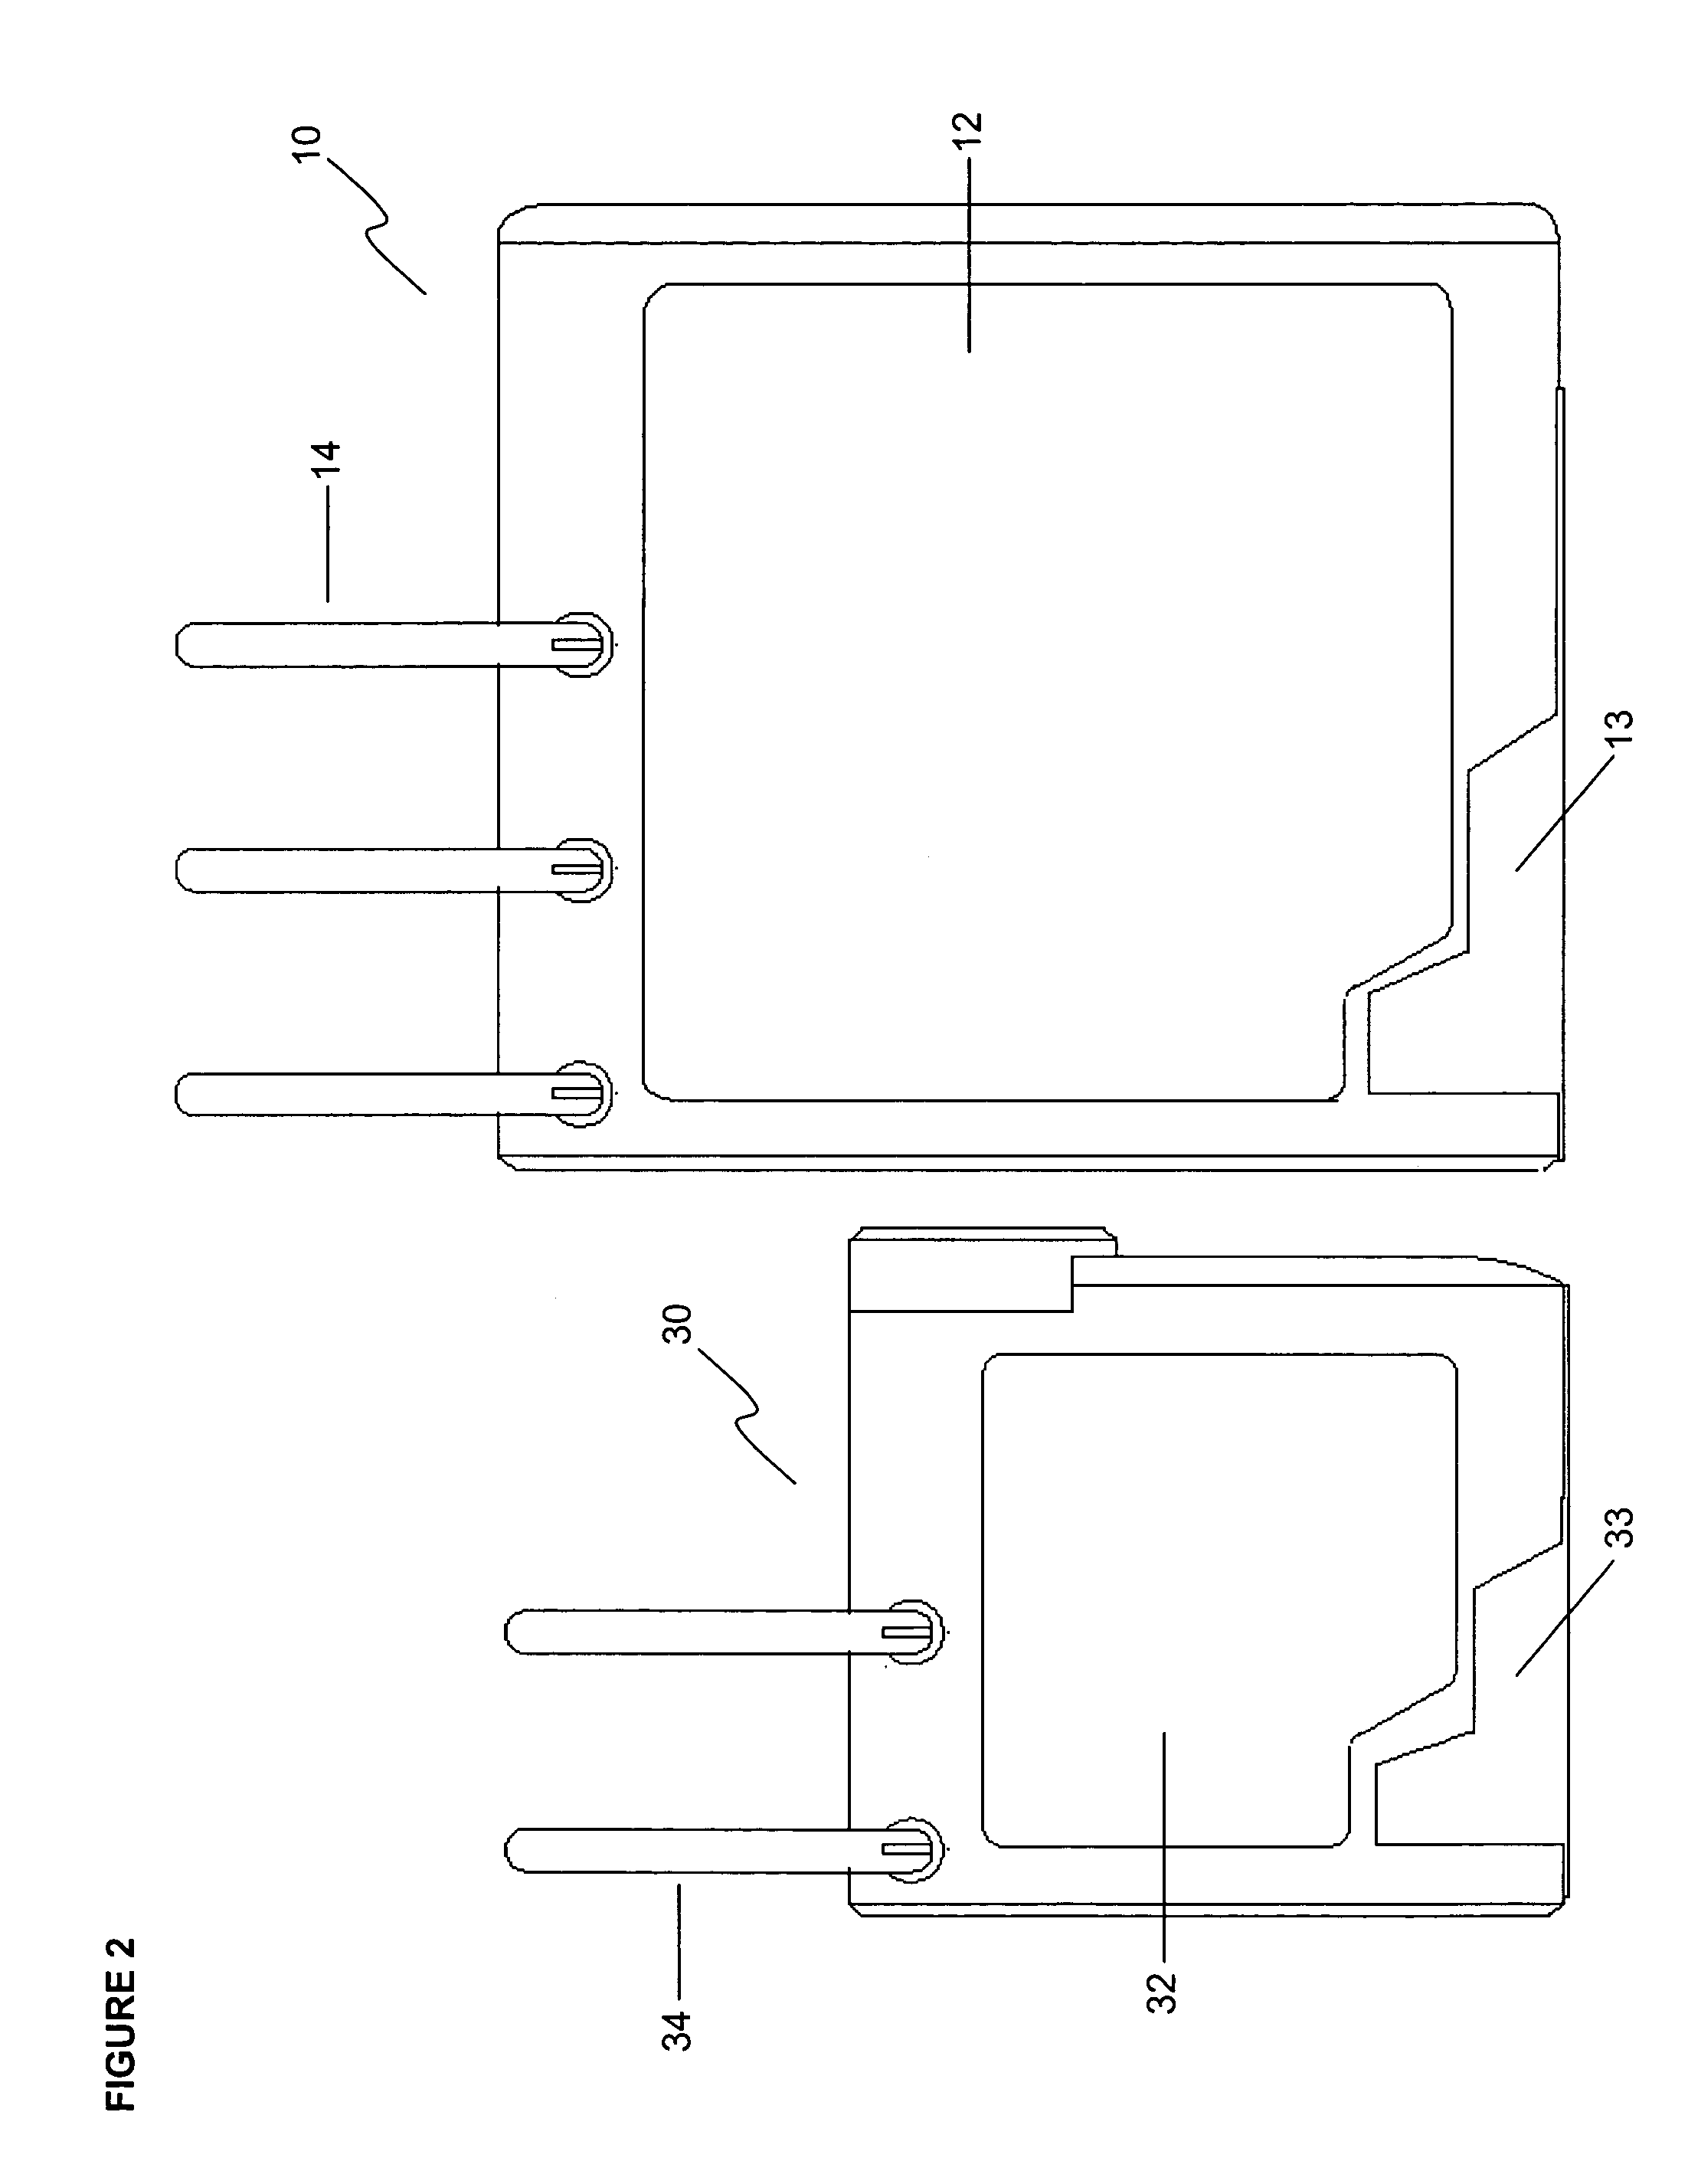 Wireless video surveillance system and method with external removable recording